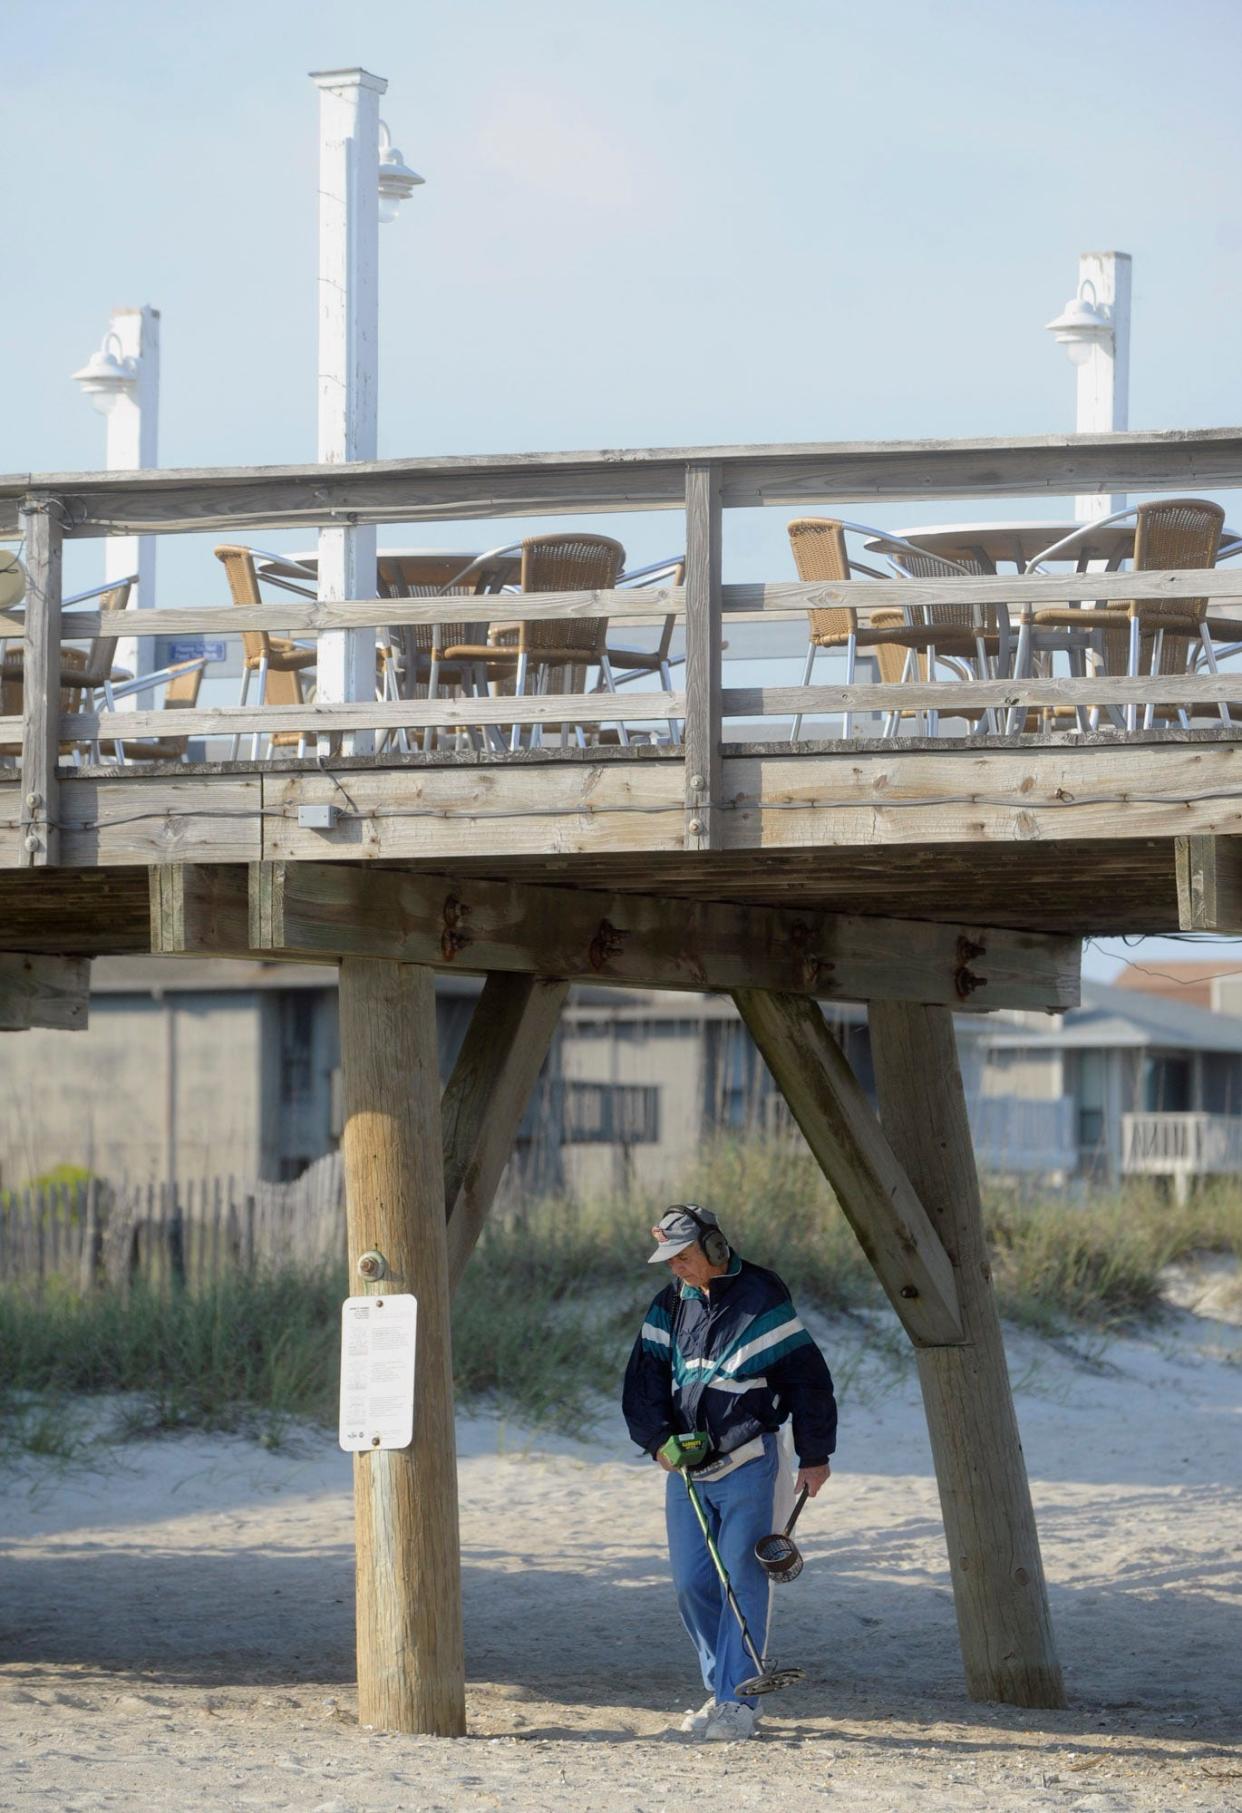 Local treasure hunter George Lapinsky uses his metal detector to search the sand at Wrightsville Beach's Crystal Pier. If you're looking for a unique activity with the possibility of finding treasurers, give it a try yourself.